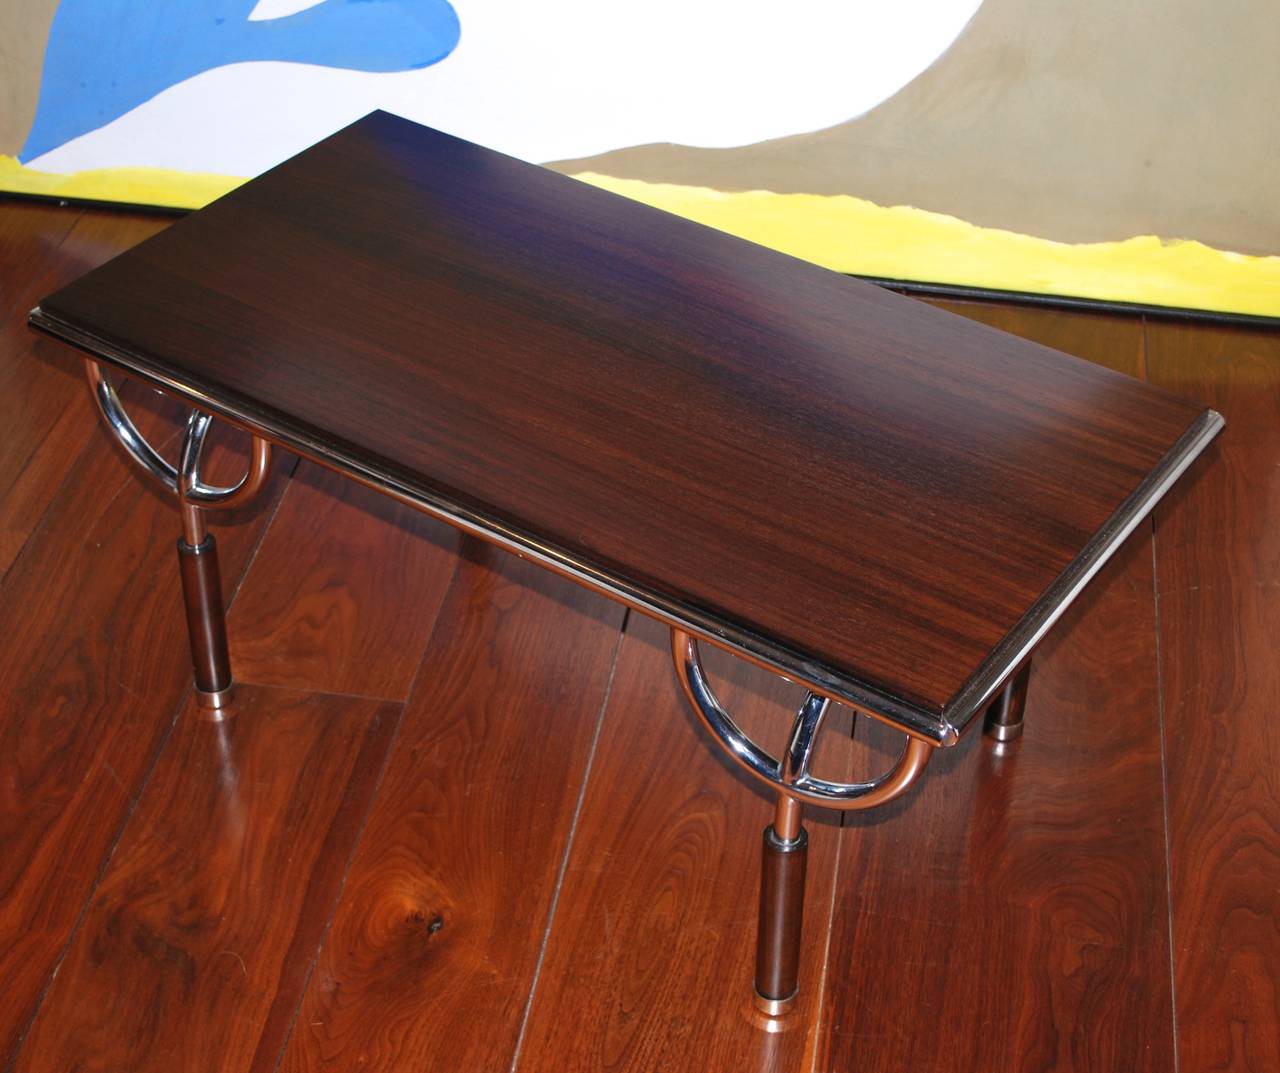 Newly refinished pair of walnut tables by Aimaro Isola and Roberto Gabetti, 
Italy, circa 1970. Italian walnut top over chromed steel legs with U-shaped supports,
chrome trim to edge. Great sculptural design. May be used as cocktail or side tables.